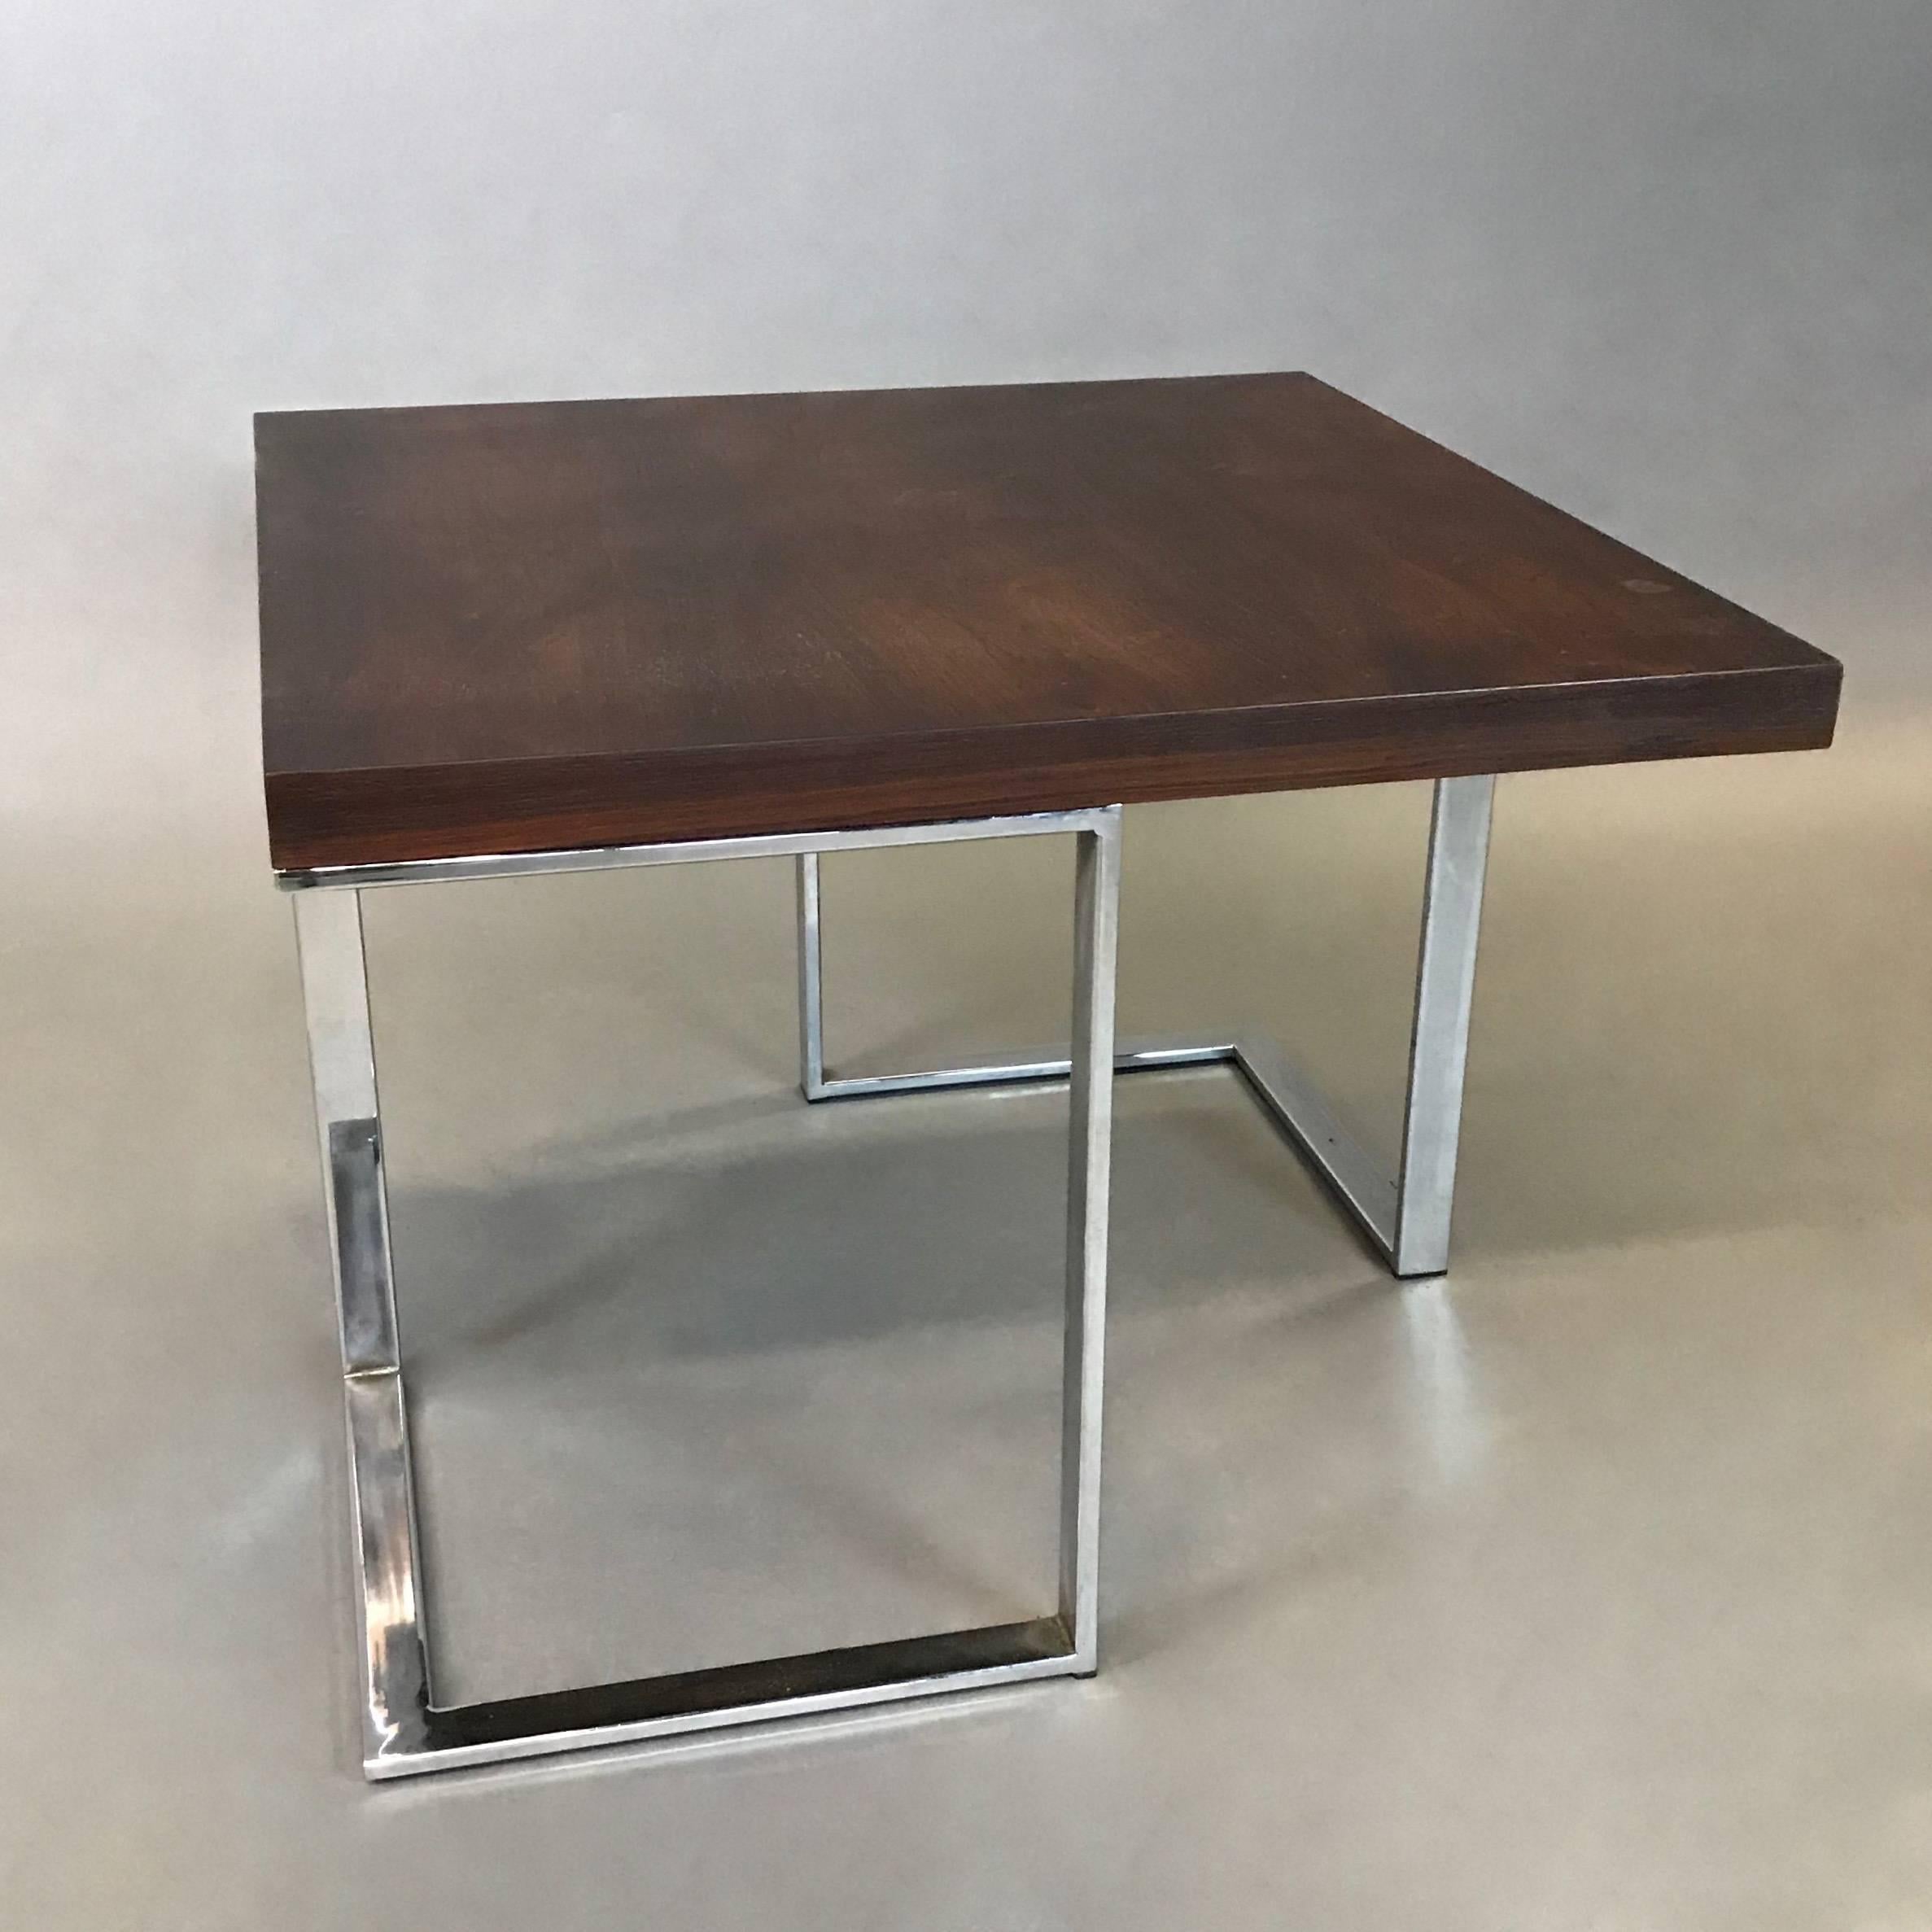 Striking, modernist coffee or side table features a rosewood top with architectural chrome bases is very much in the style of Milo Baughman.